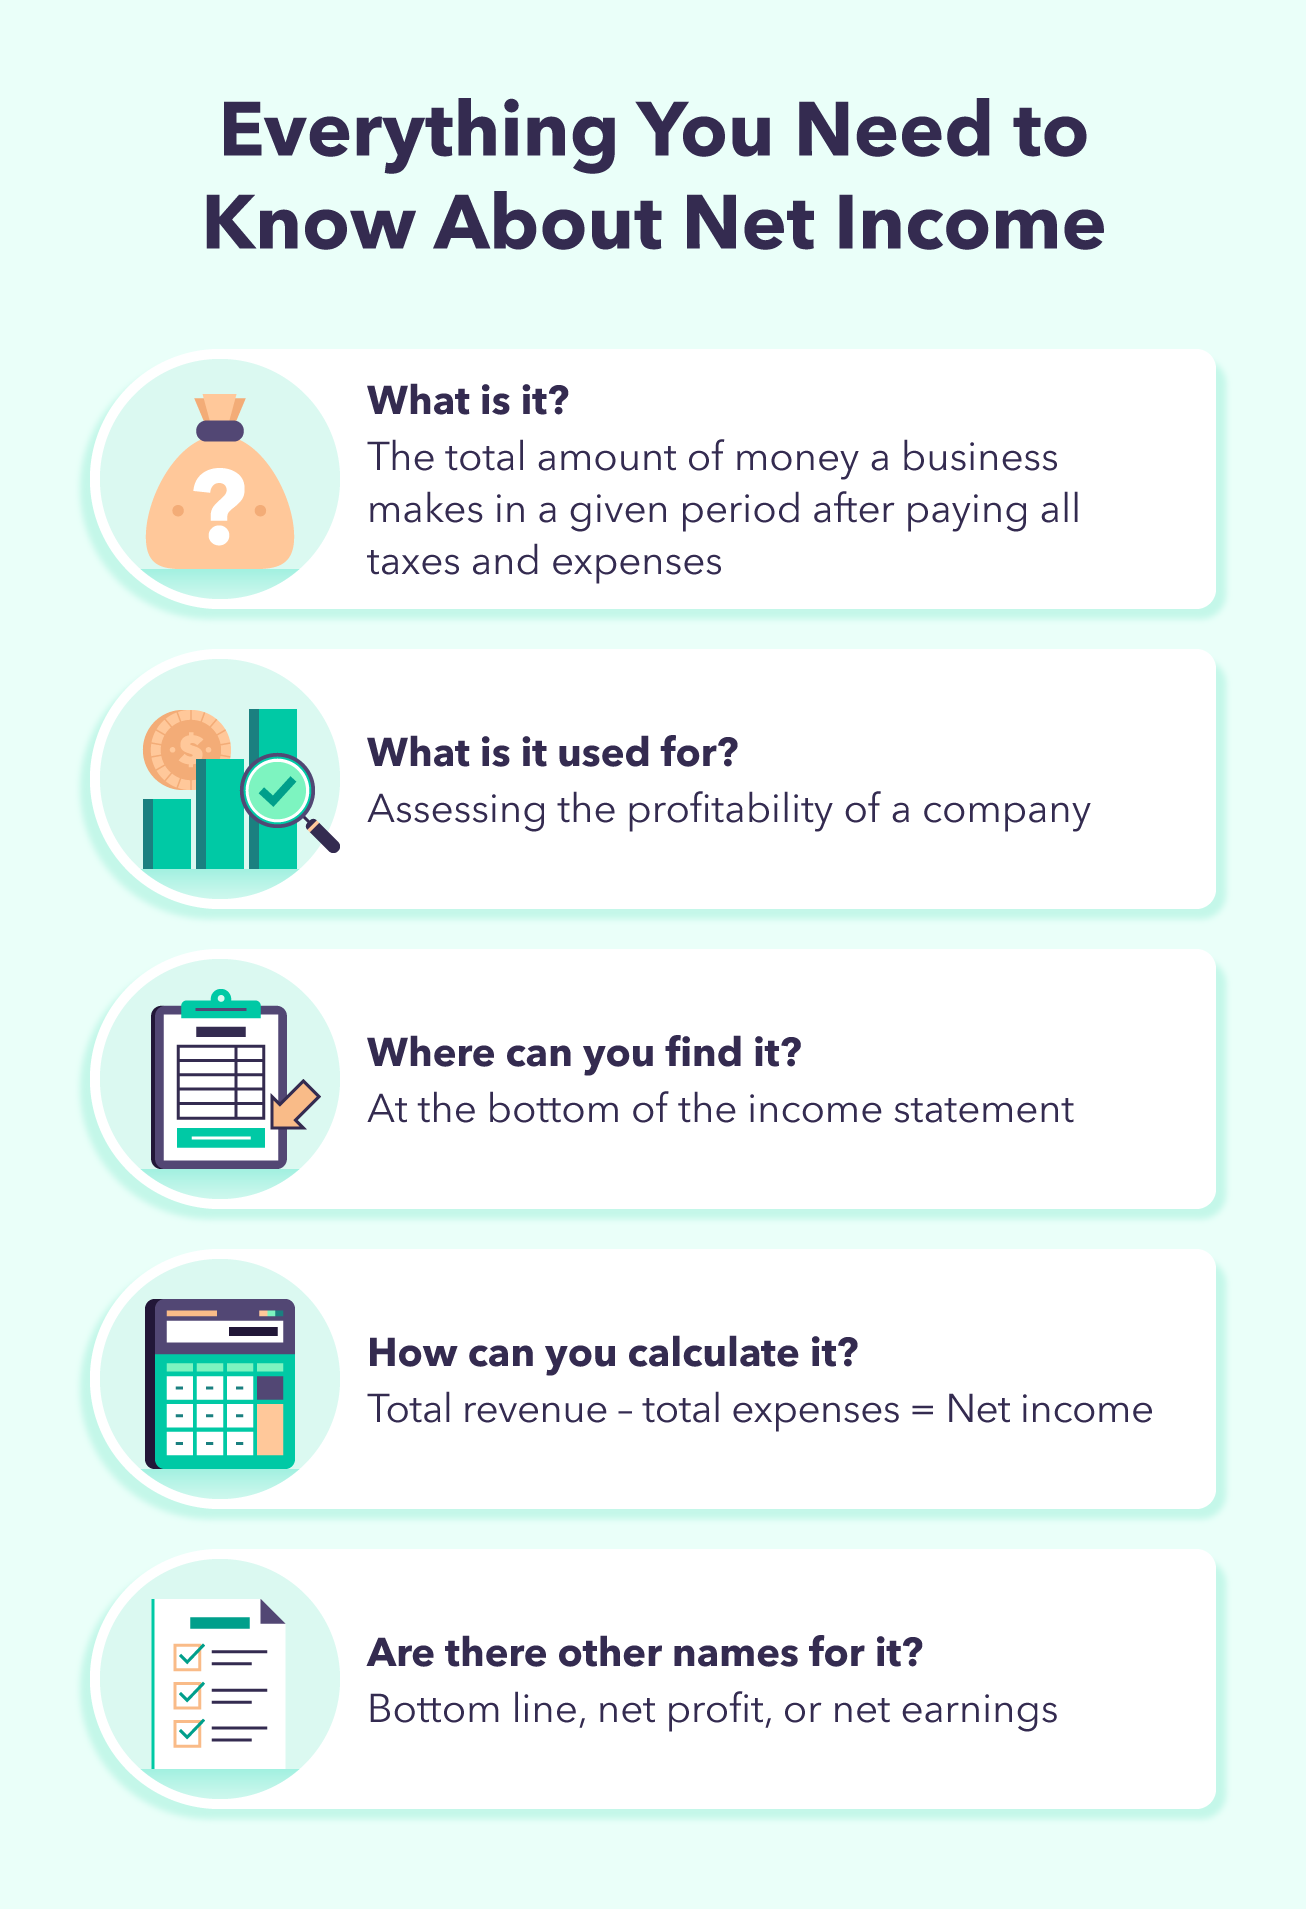 A graphic breaks down everything you need to know about net income, including the net income formula.